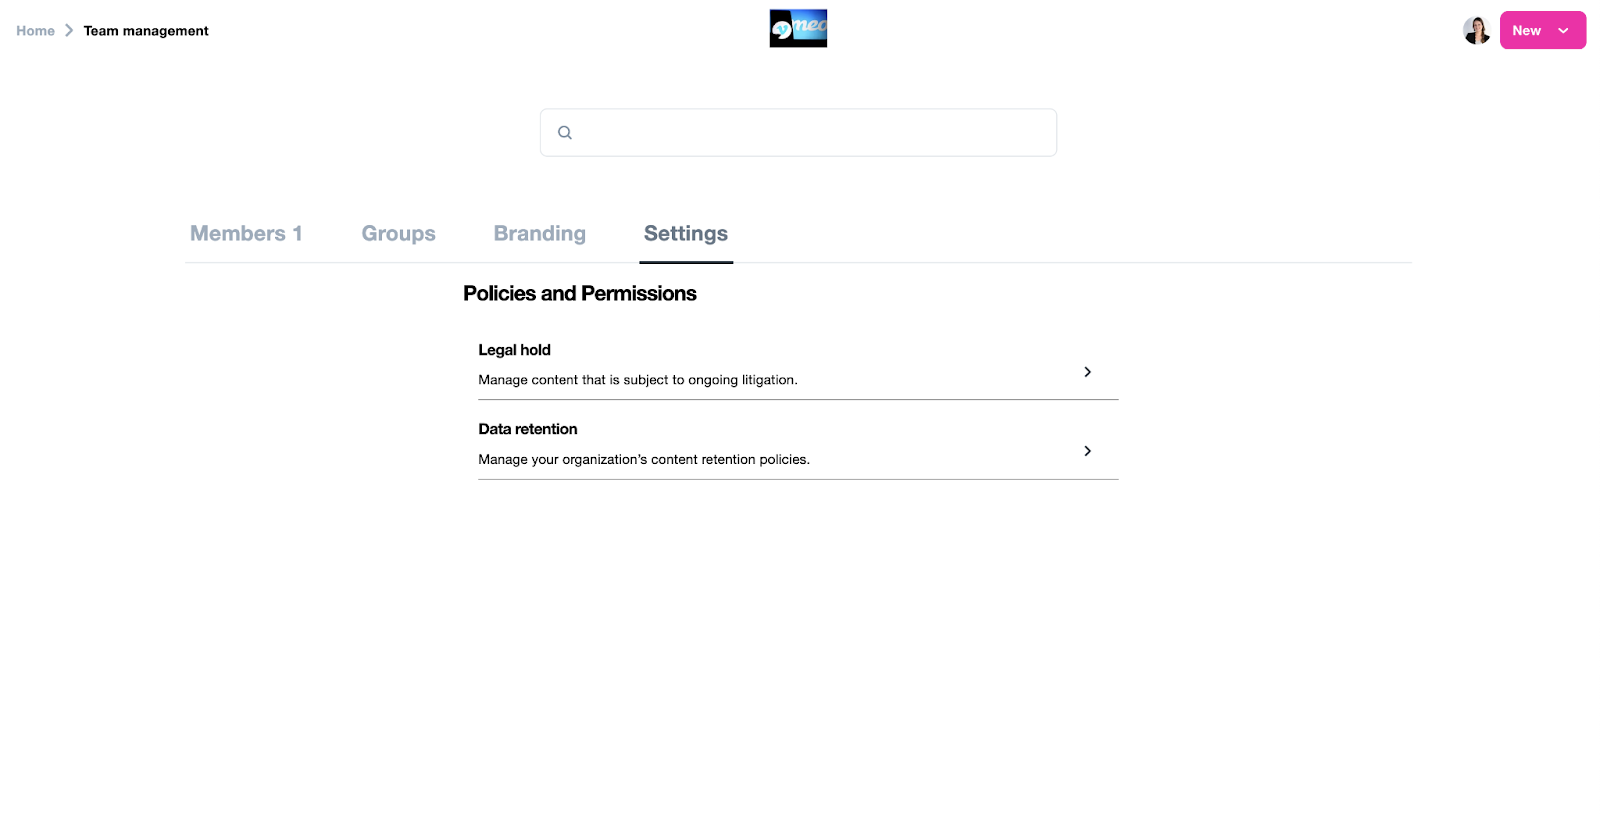 A screenshot of the Settings tab of the team management page. Under the header 'Policies and Permissions', there is a button for 'Legal Hold' and for 'Data Retention'. 'Legal Hold' is described as 'Manage content that is subject to ongoing litigation'. 'Data Retention' is described as 'Manage your organization's content retntion policies'.